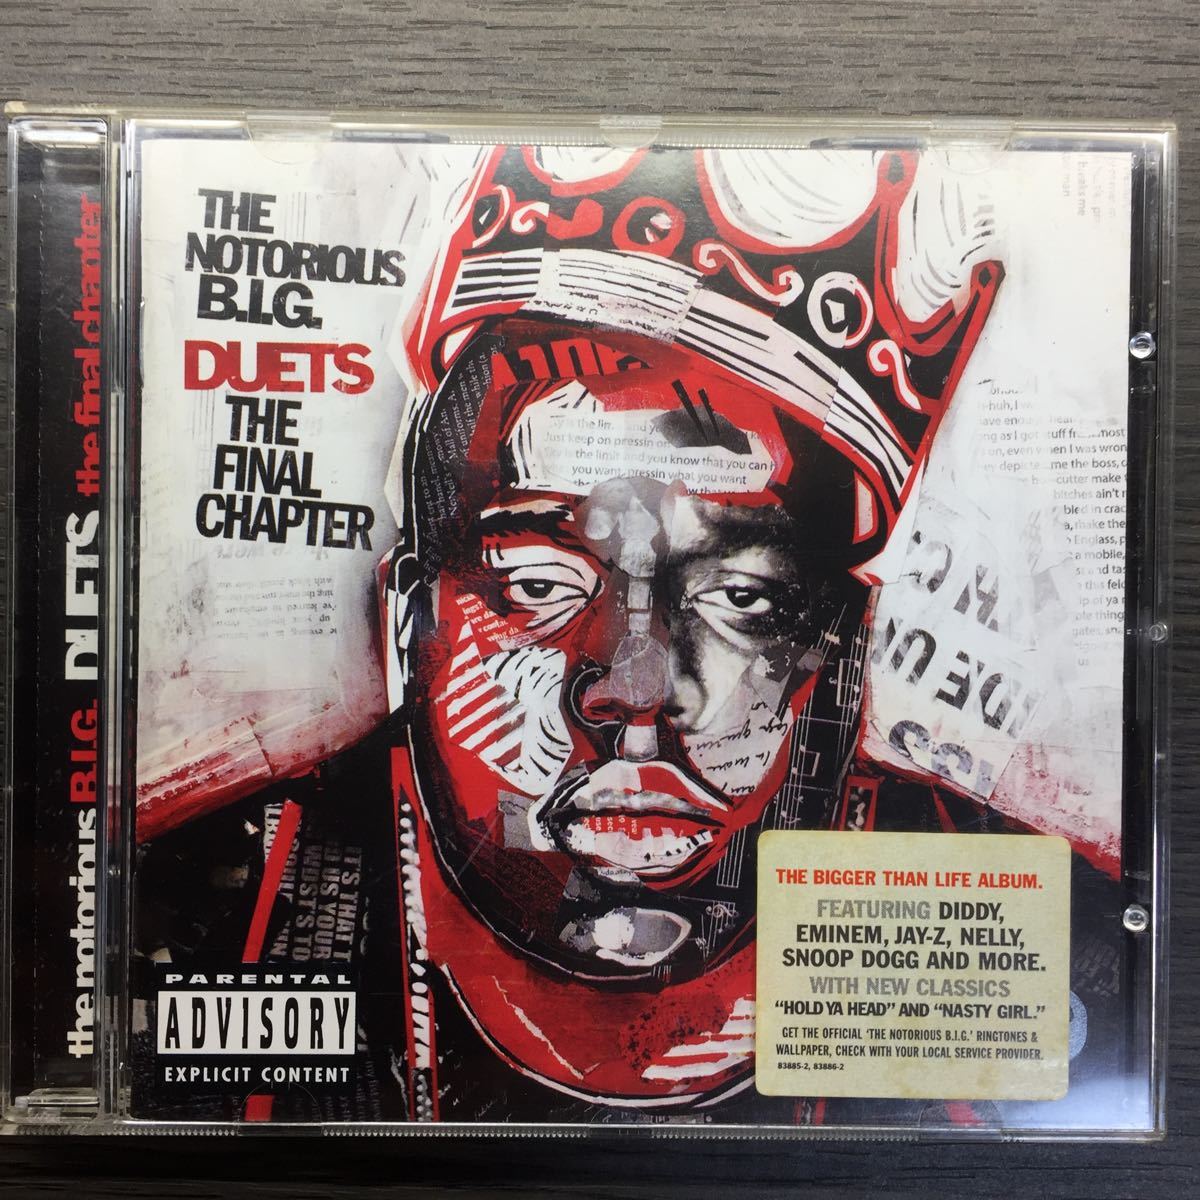 The Notorious B.I.G. / Duets The Final Chapter